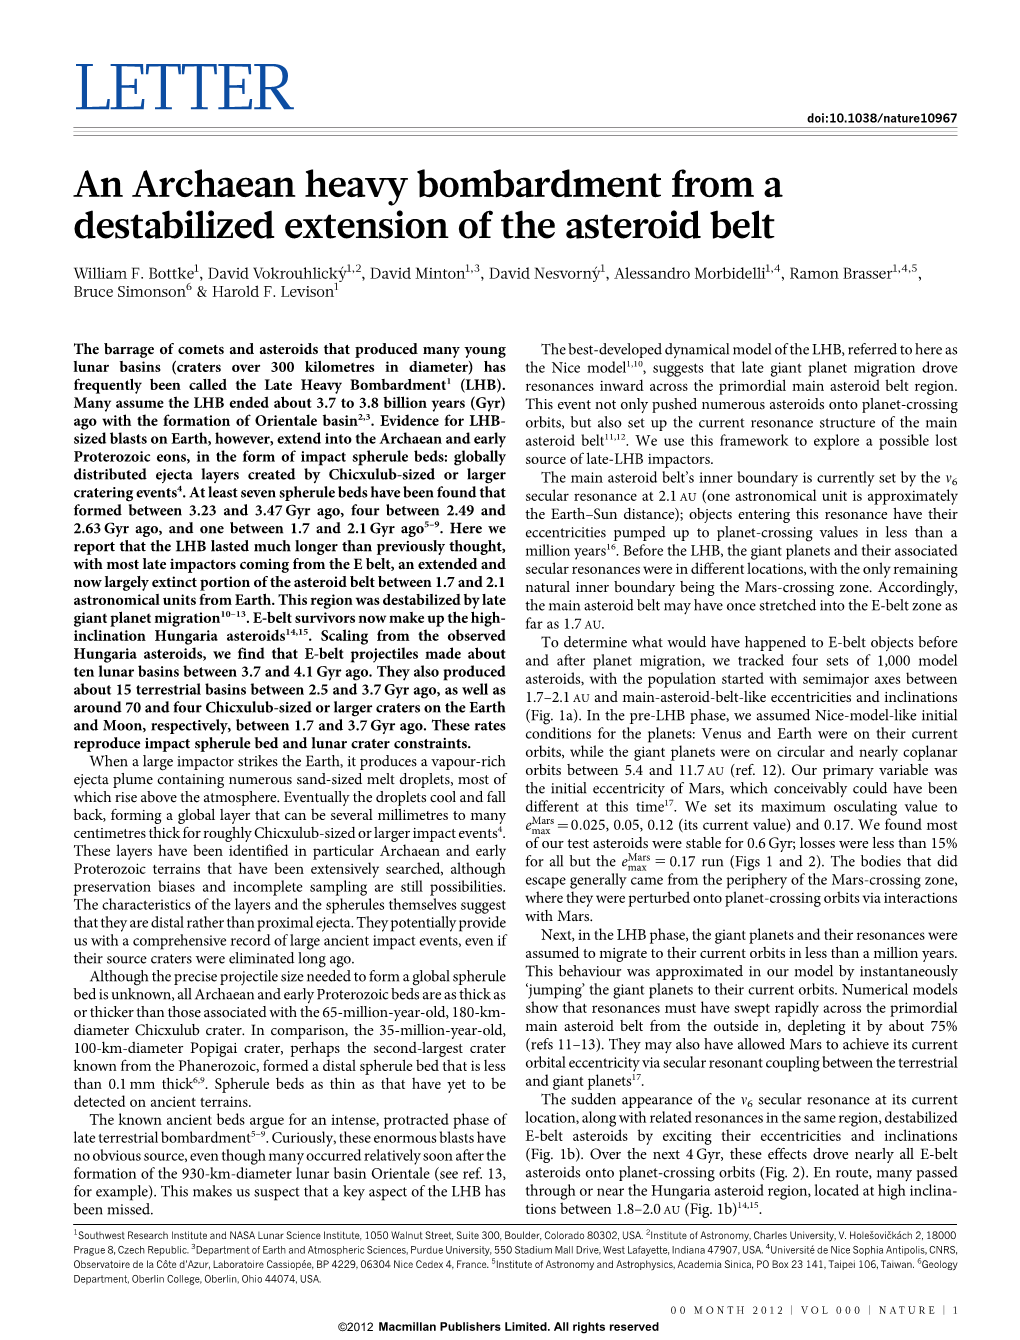 An Archaean Heavy Bombardment from a Destabilized Extension of the Asteroid Belt